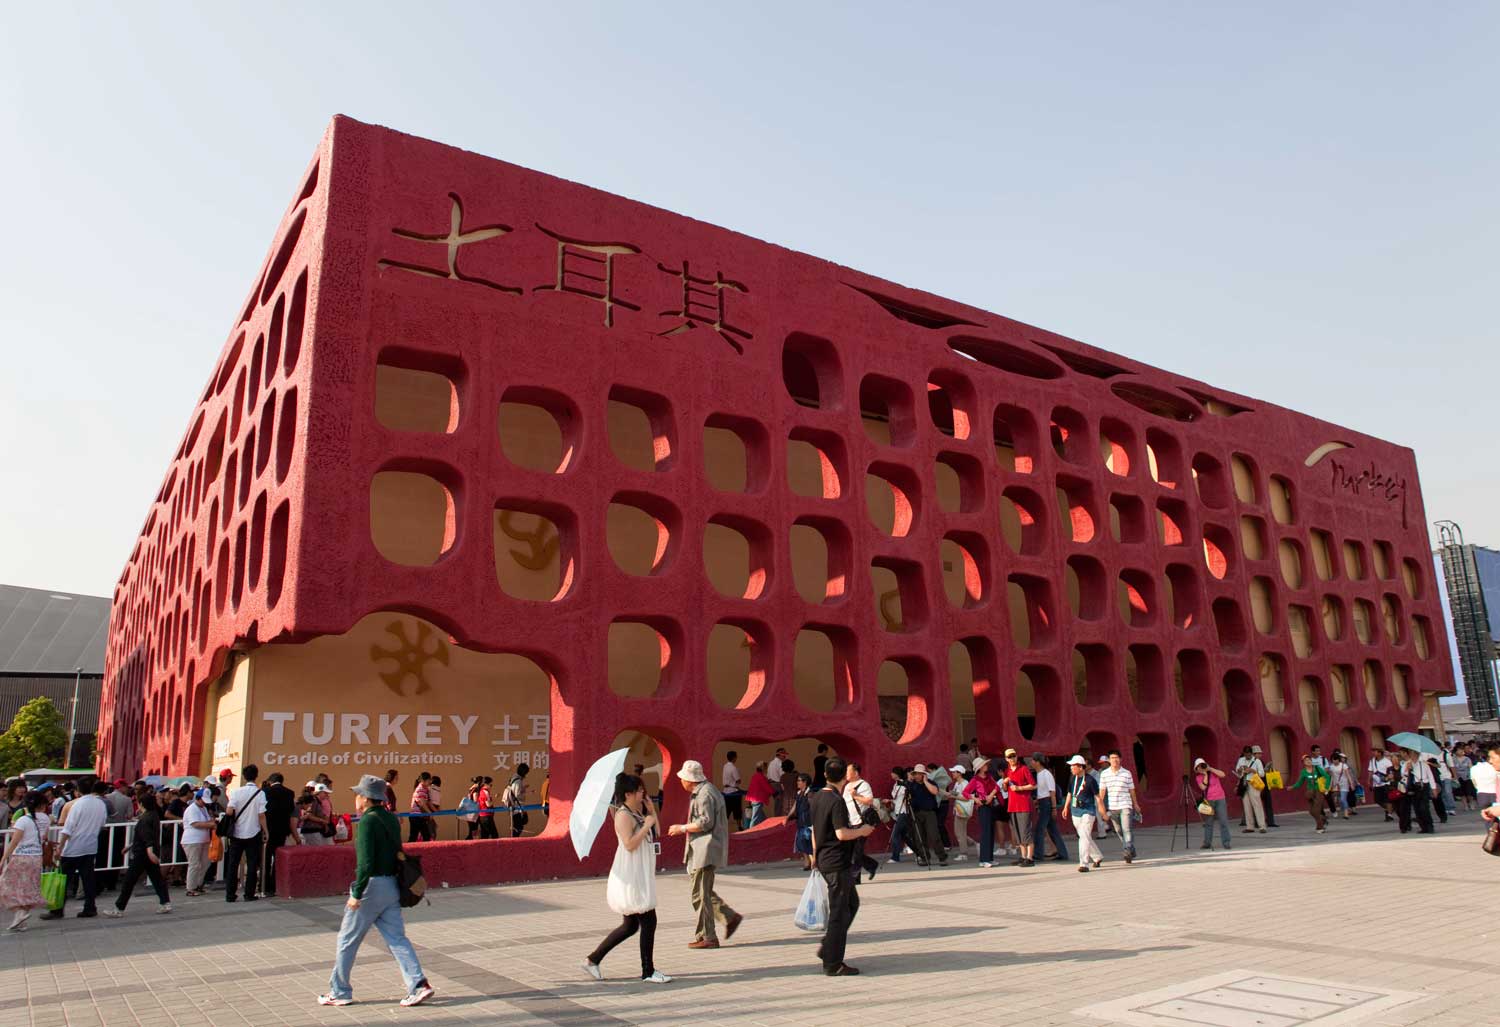 Exterior view of the Turkish Pavilion at the Shanghai EXPO 2010.